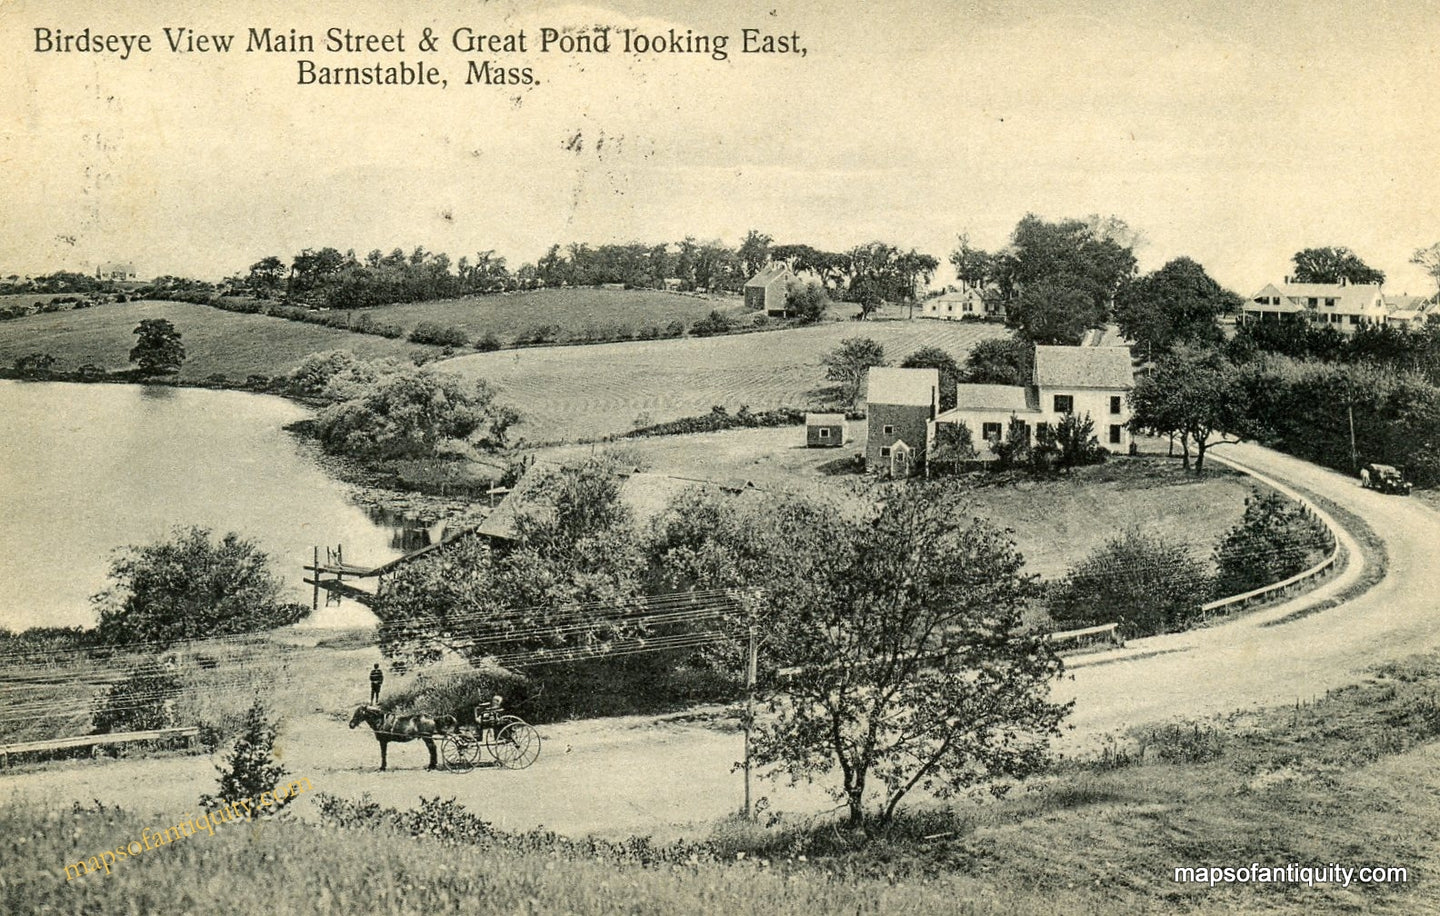 Black-and-White-Printed-Antique-Postcard-Birdseye-View-Main-Street-&-Great-Pond-looking-East-Barnstable-MA---Postcard-Antique-Postcards--1915-Phinney-Maps-Of-Antiquity